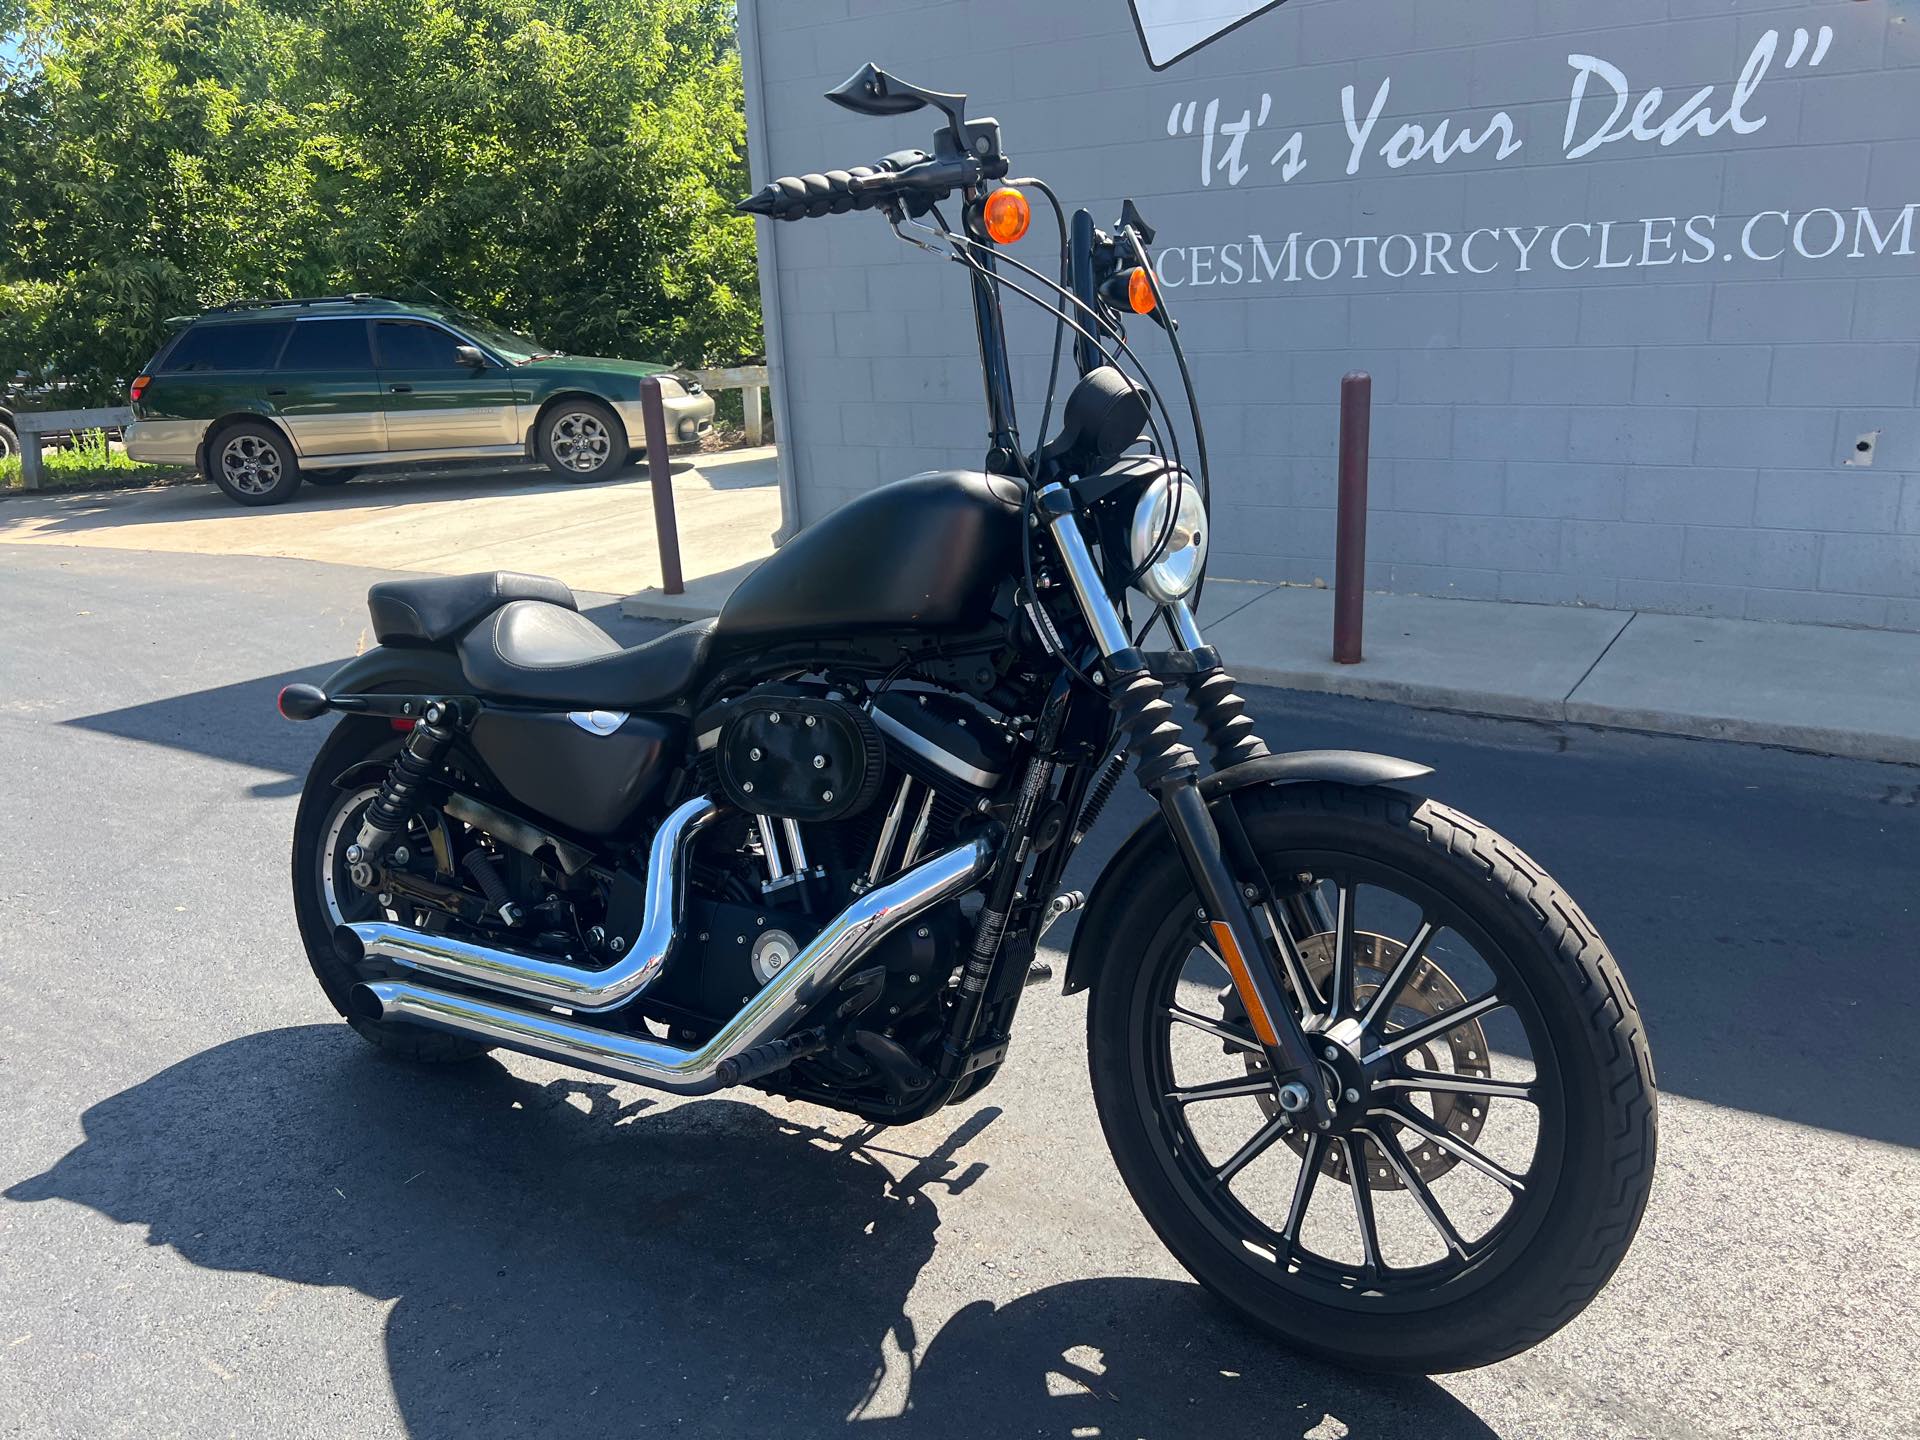 2014 Harley-Davidson Sportster Iron 883 at Aces Motorcycles - Fort Collins